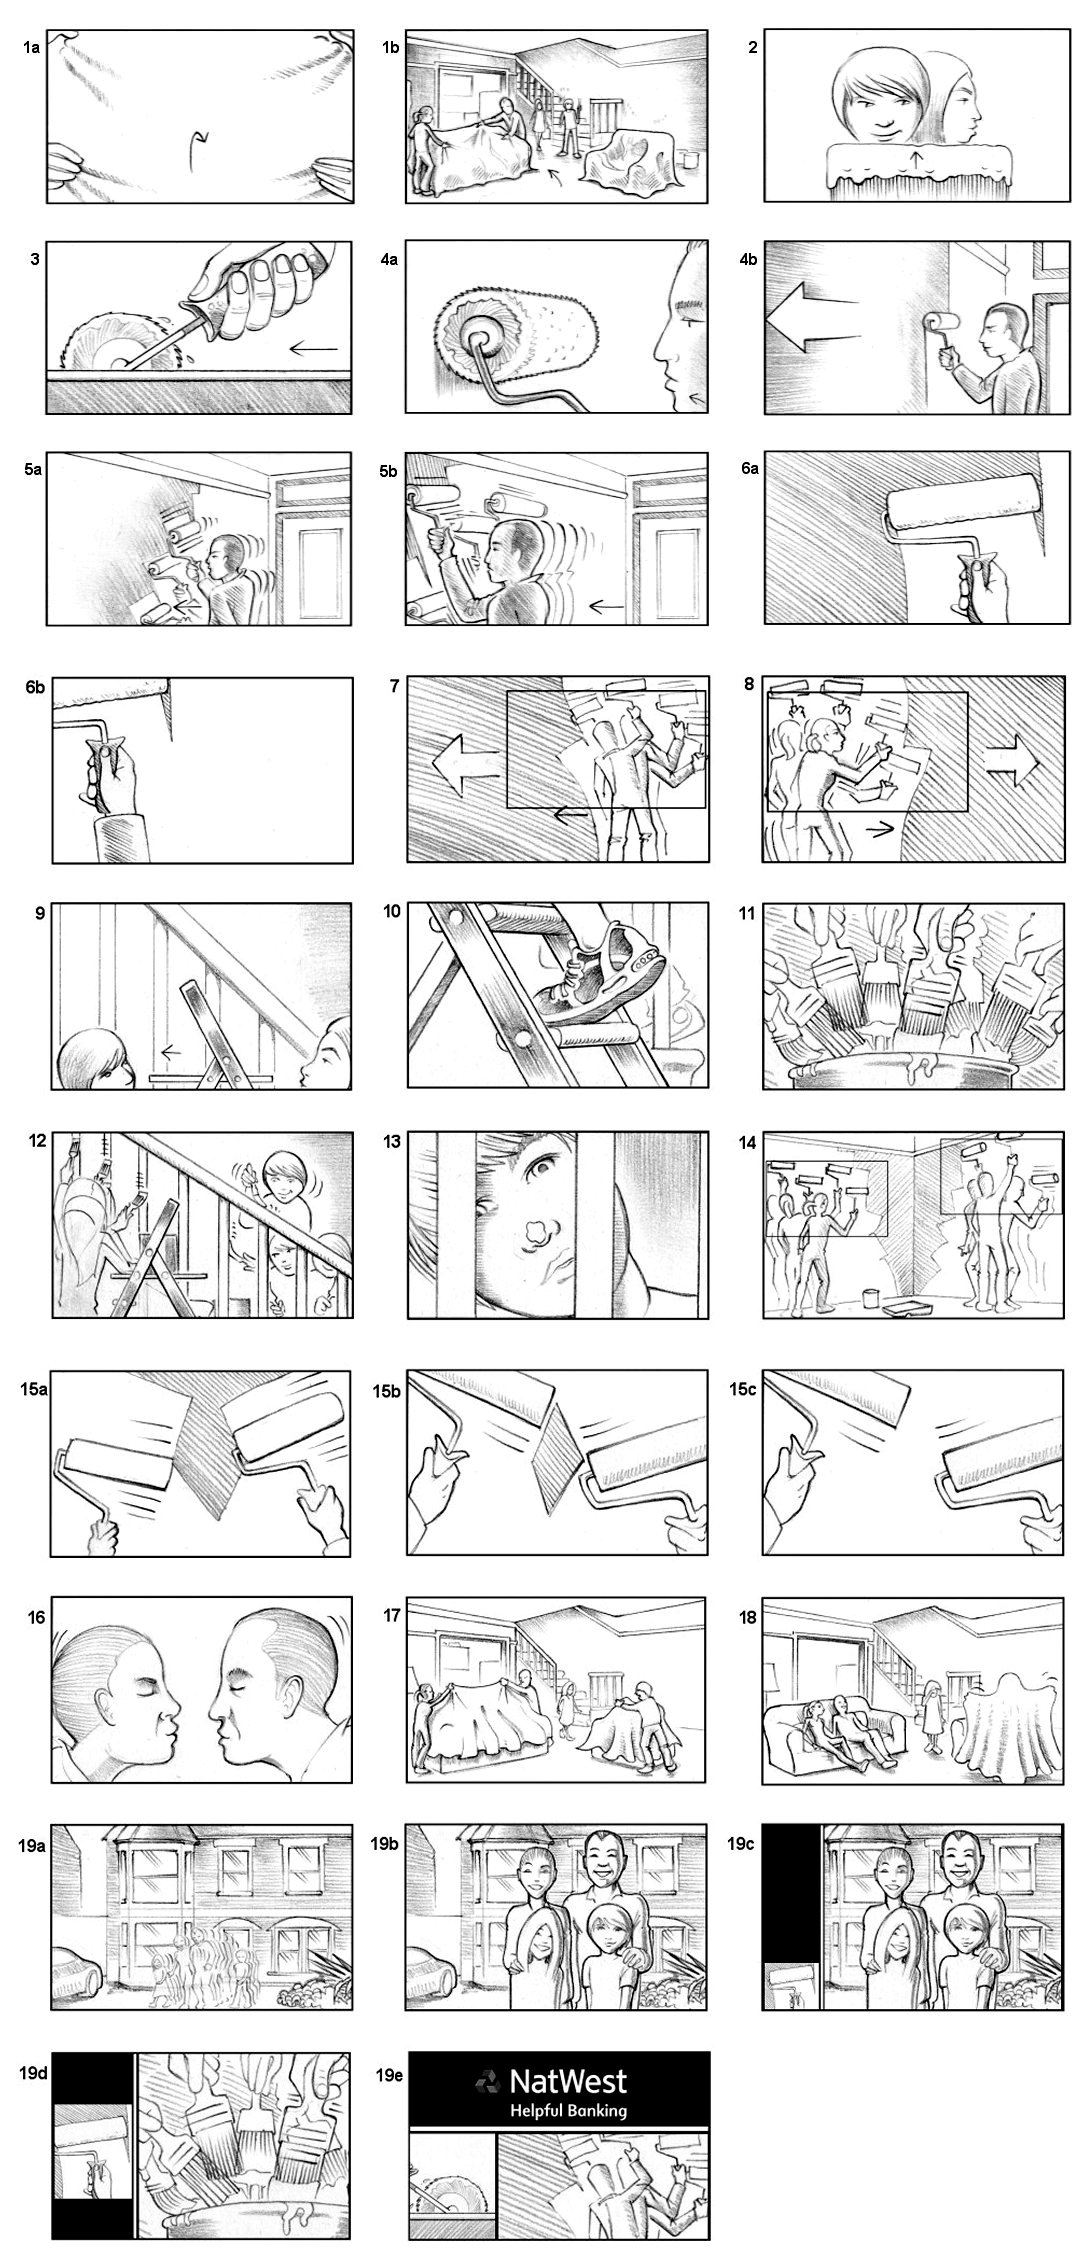 NAT WEST BANK STORYBOARD BY ANDY SPARROW